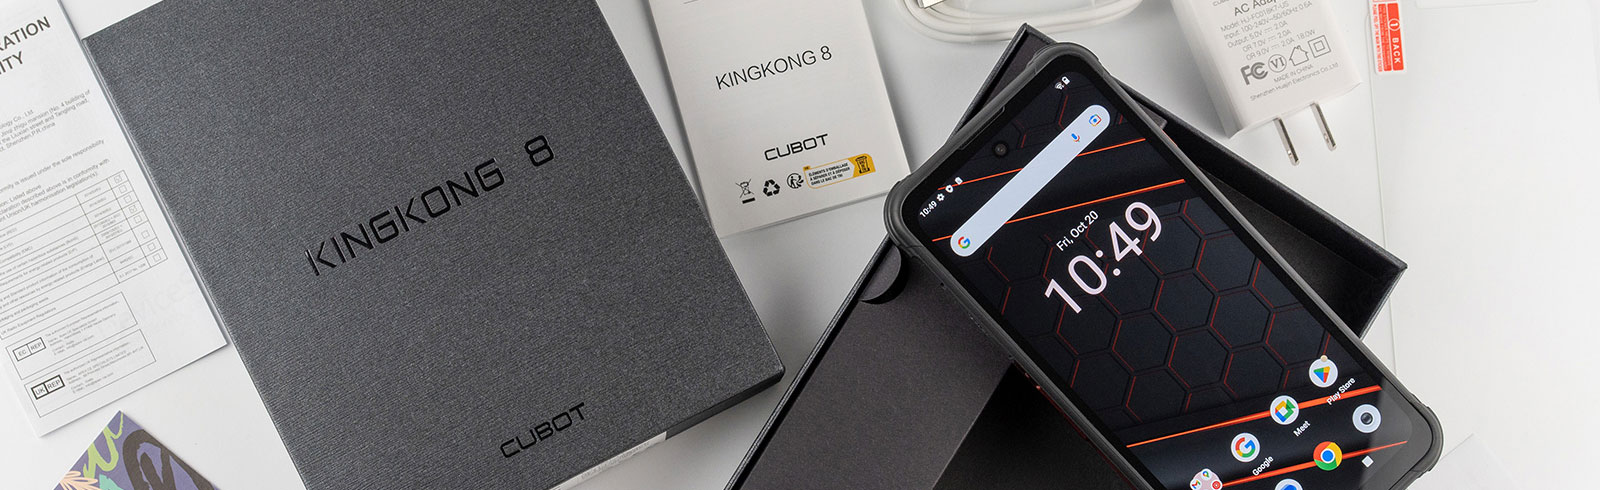 CUBOT KINGKONG 8 Specifications & Price (2023) Nigeriantech.com.ng